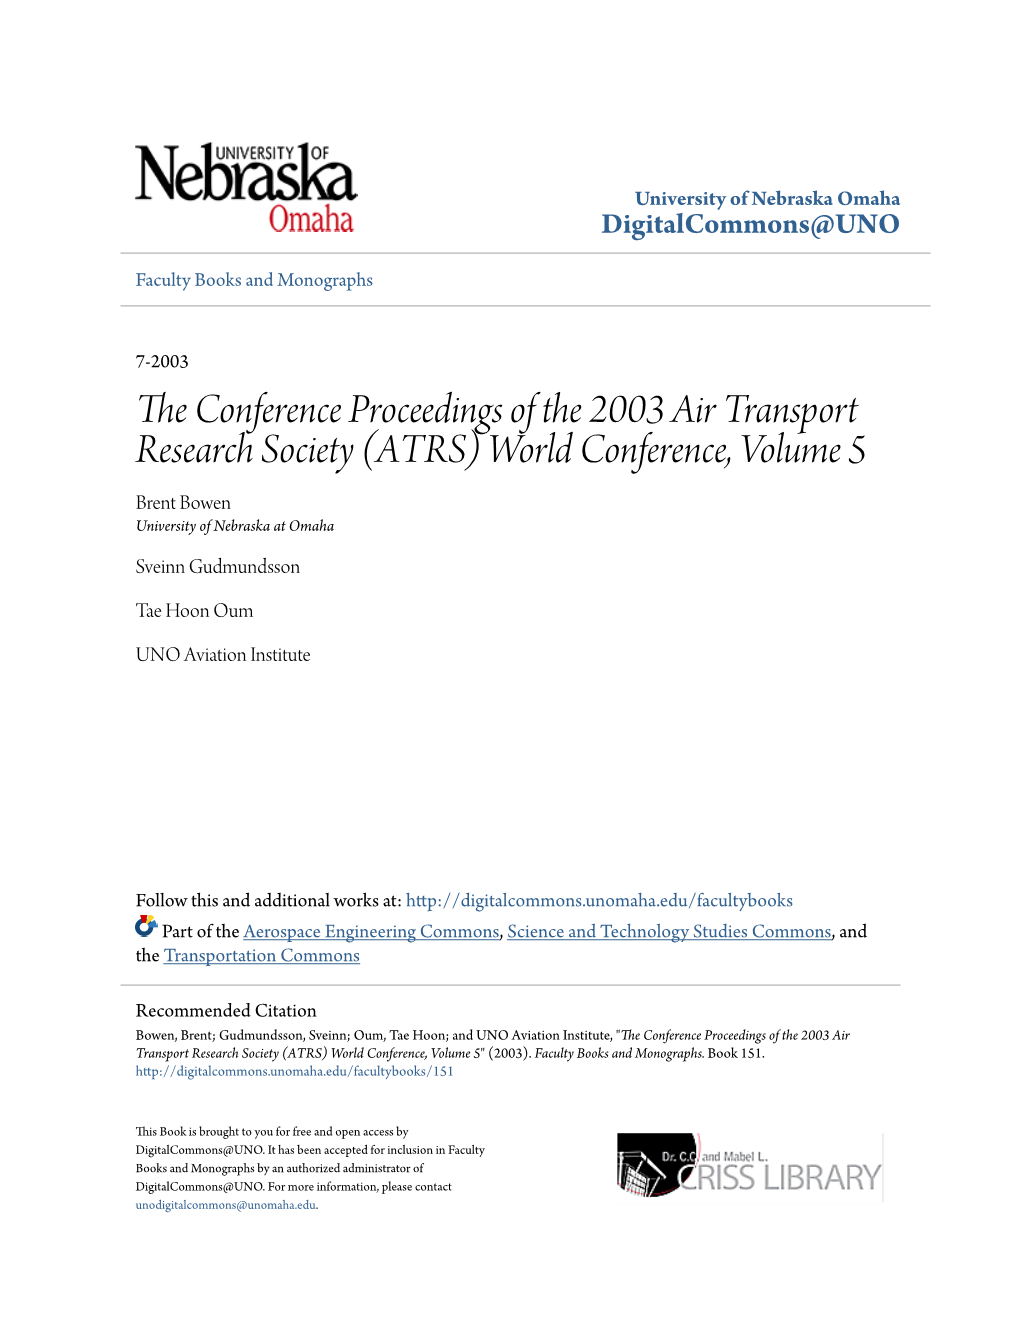 The Conference Proceedings of the 2003 Air Transport Research Society (ATRS) World Conference, Volume 5 Brent Bowen University of Nebraska at Omaha